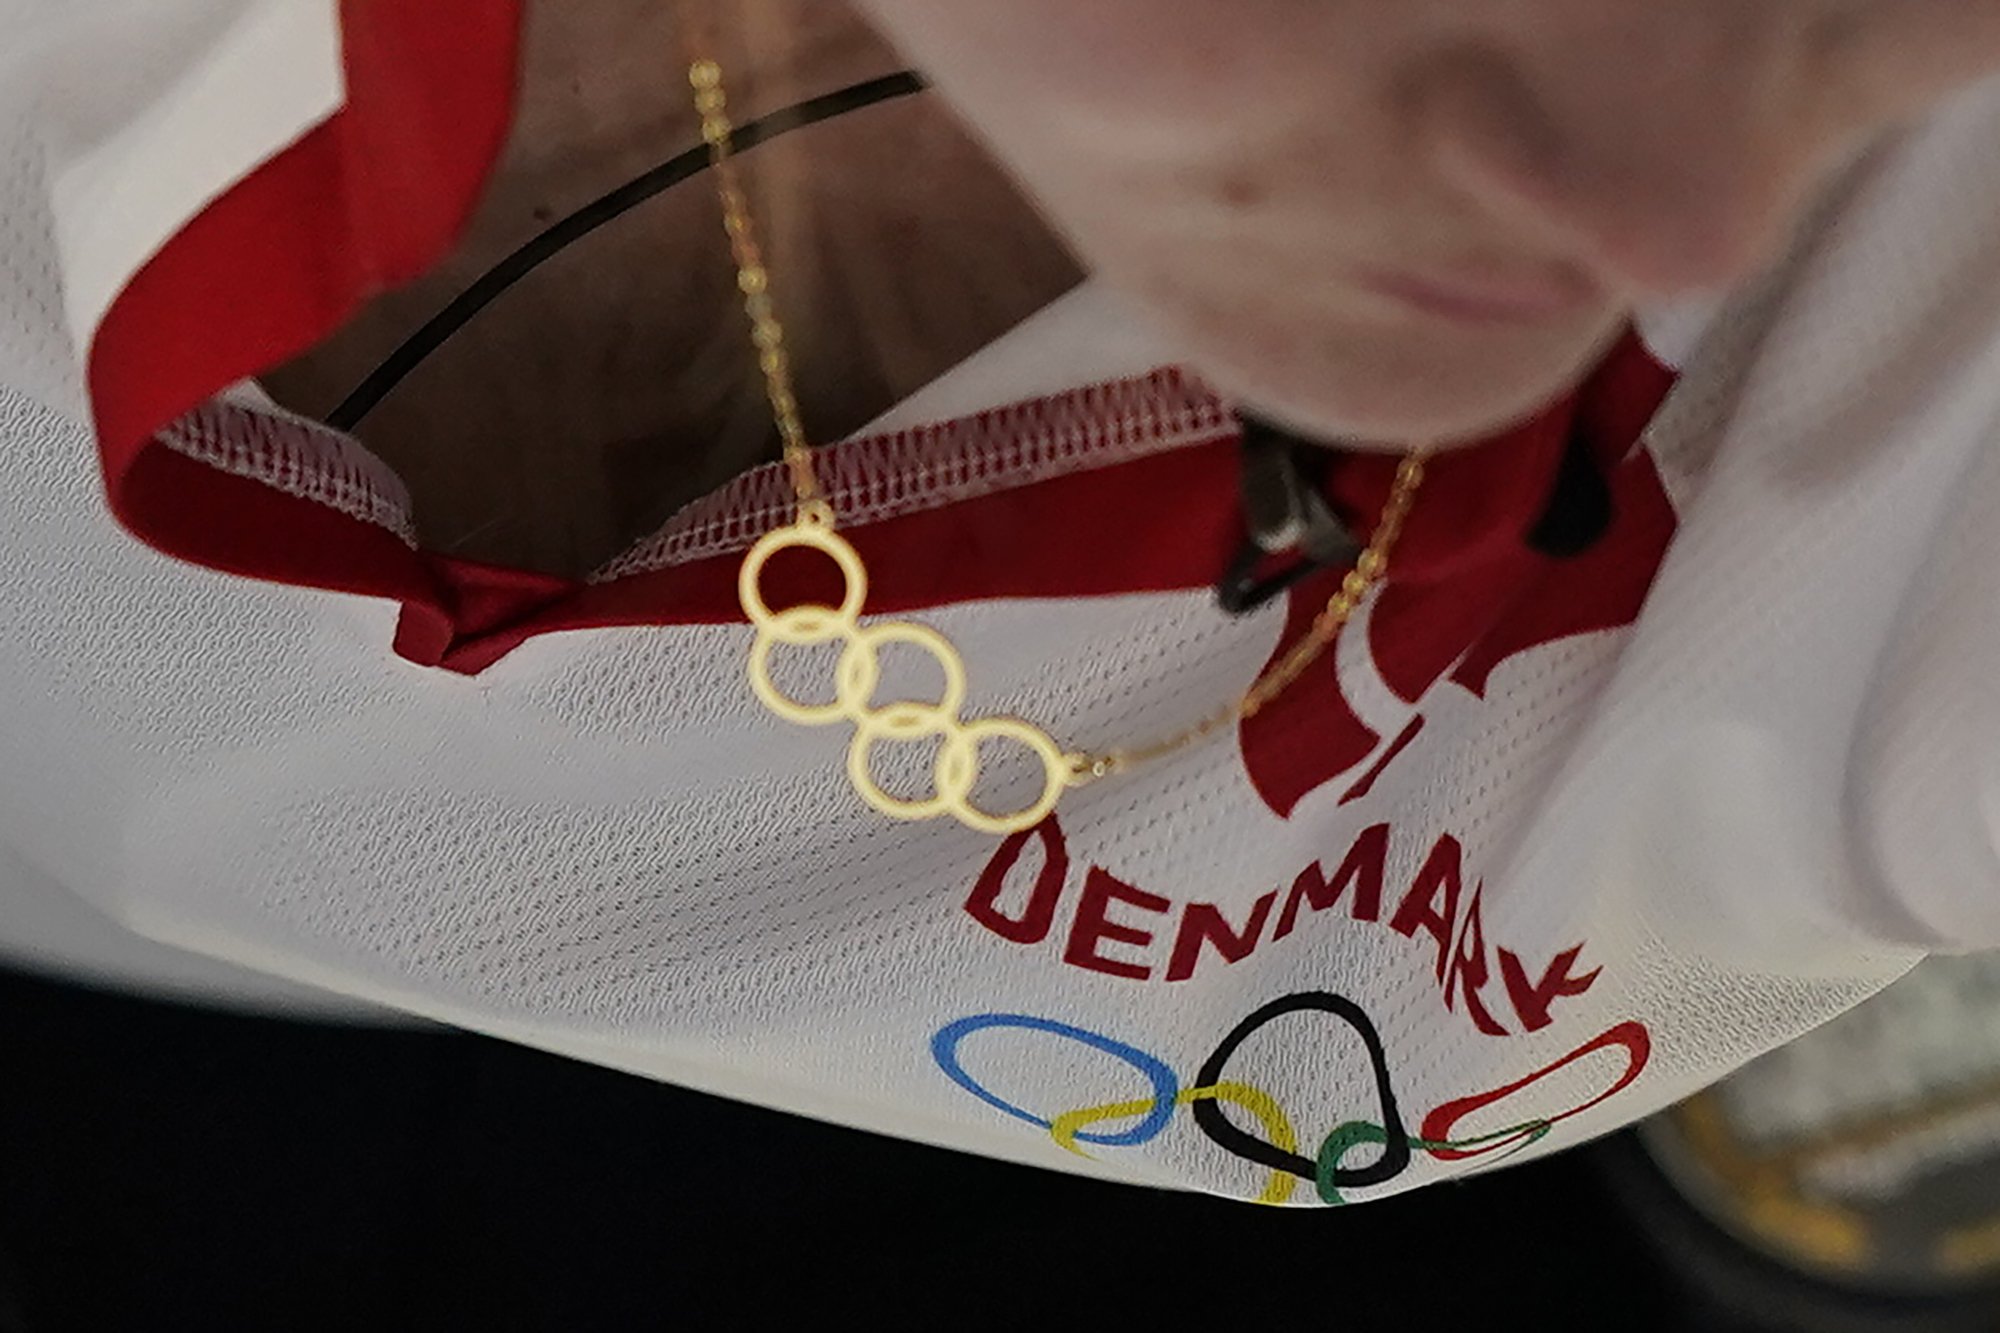  Denmark's Mathilde Halse wears the Olympics Rings necklace during a women's curling match against Japan at the Beijing Winter Olympics Saturday, Feb. 12, 2022, in Beijing. (AP Photo/Brynn Anderson) 